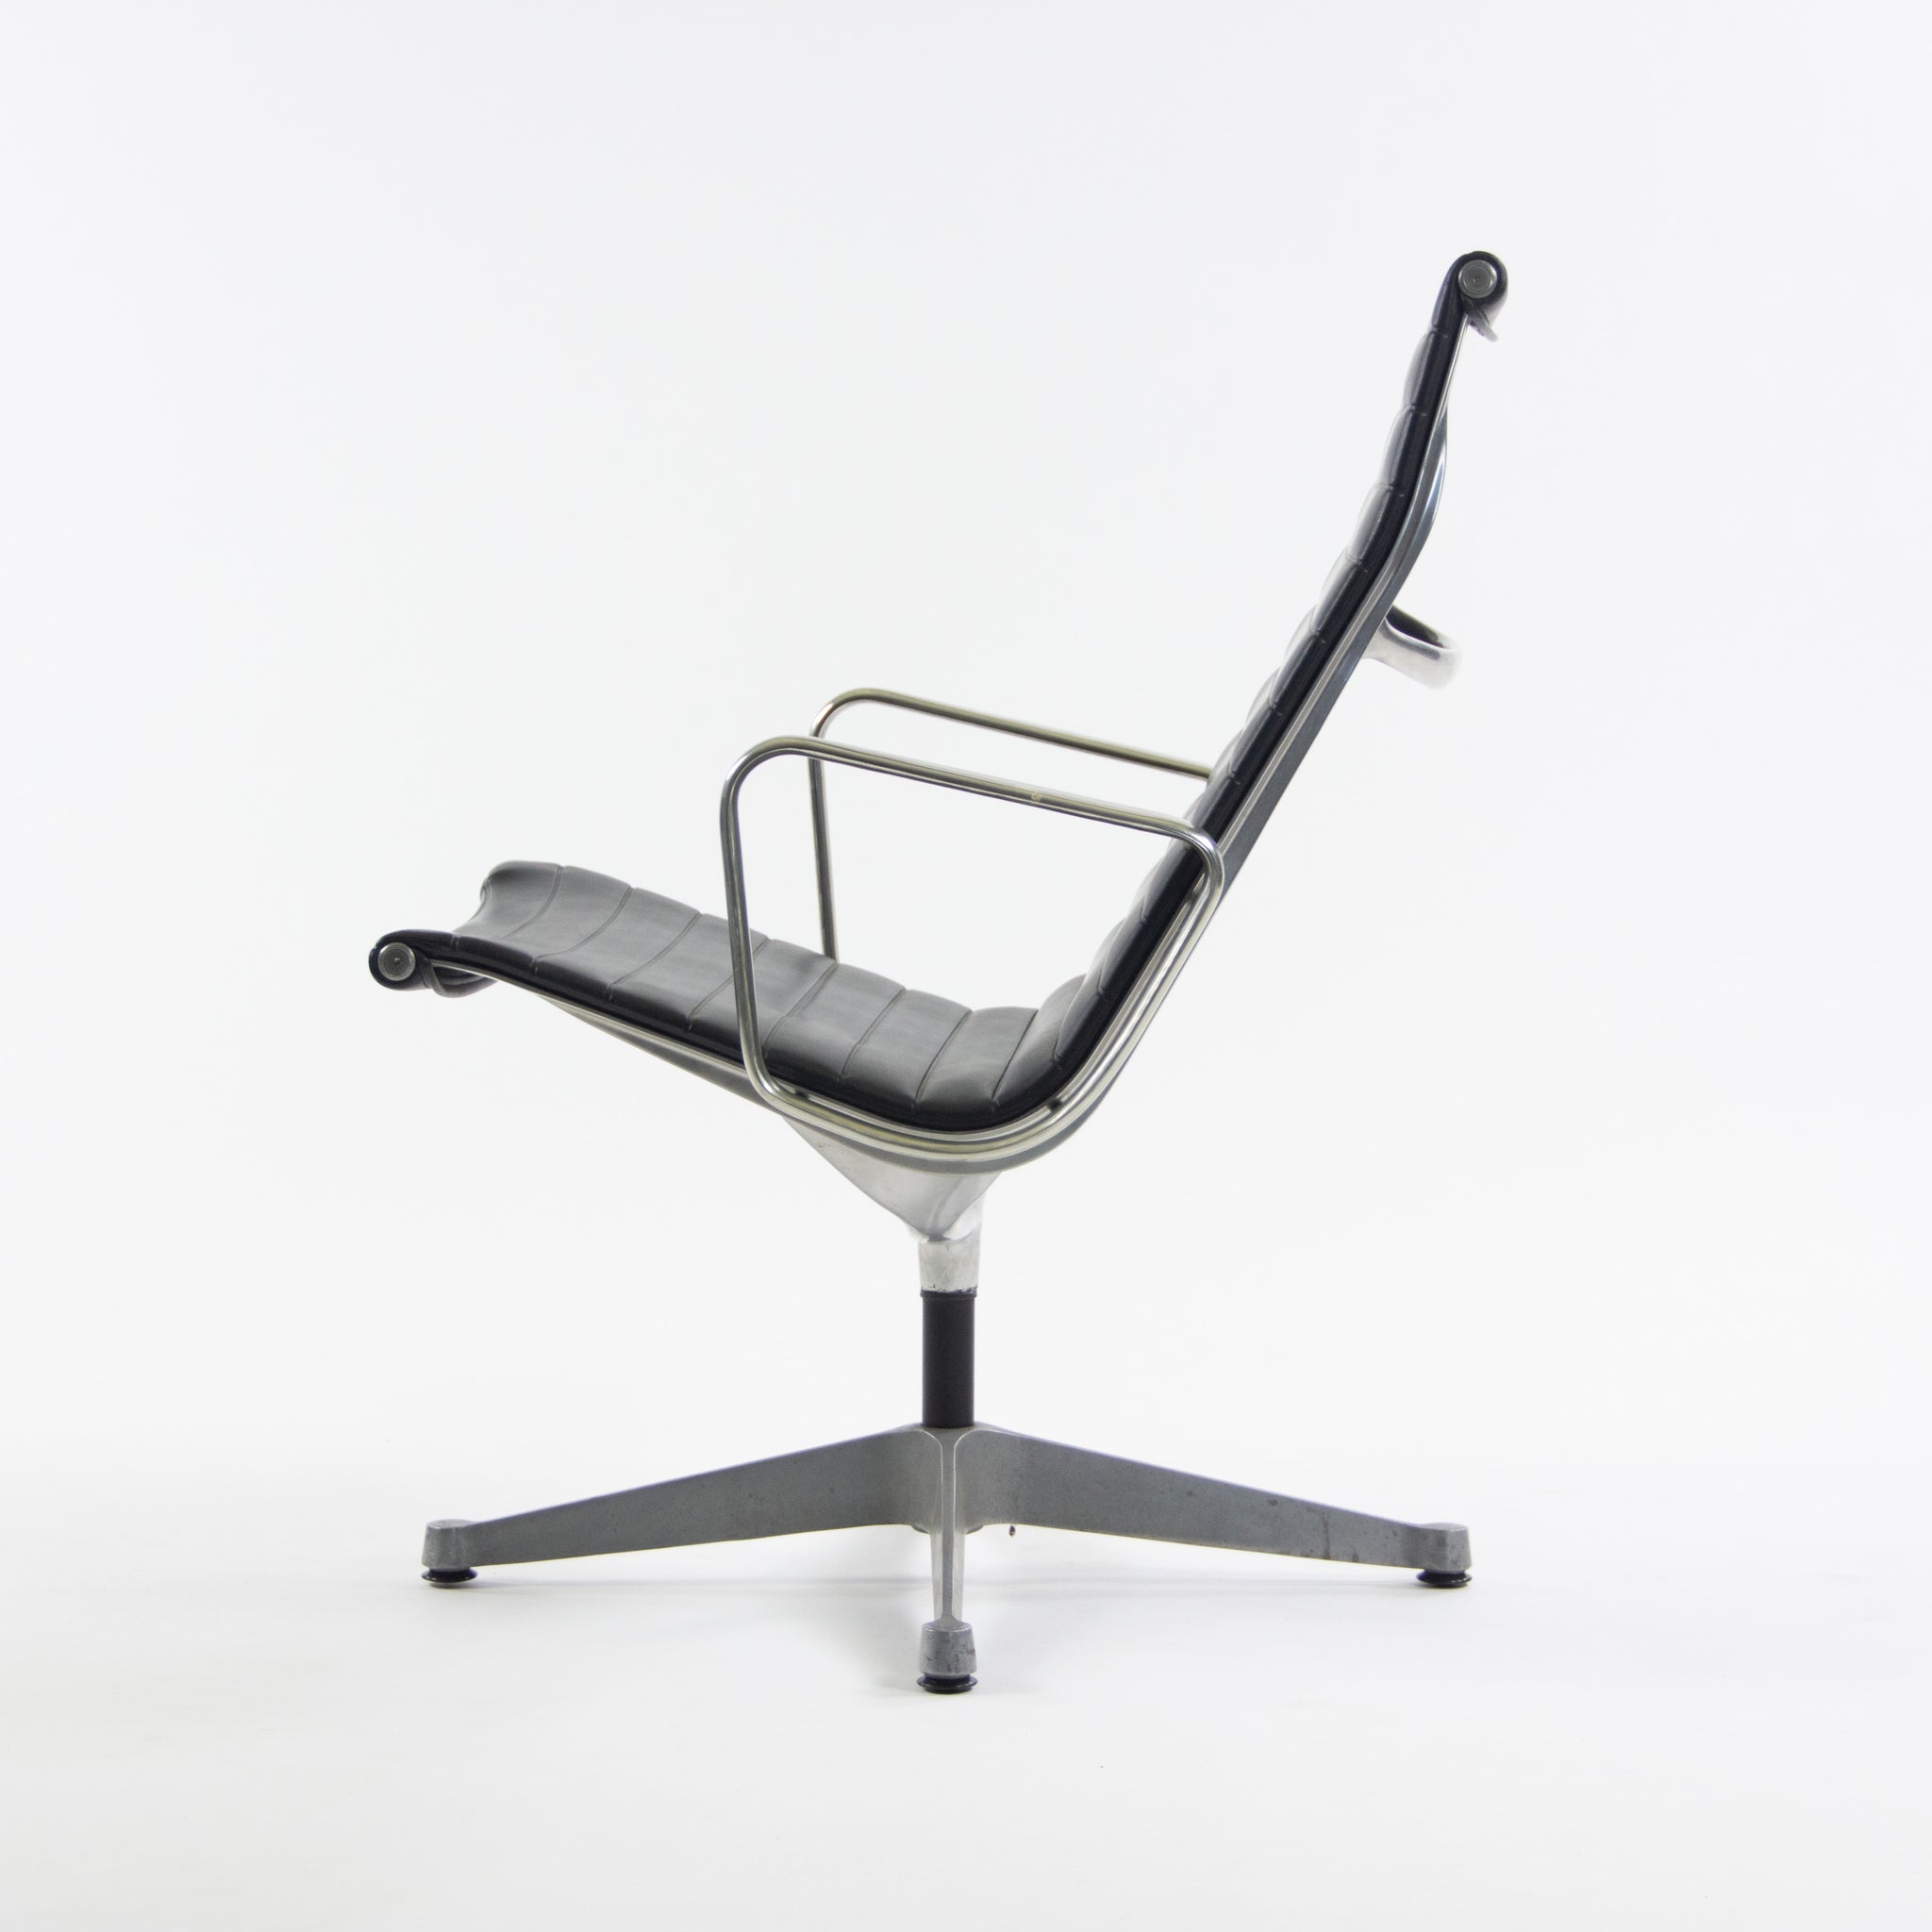 SOLD Eames Herman Miller Museum Quality Aluminum Group Lounge Chair Black Upholstery